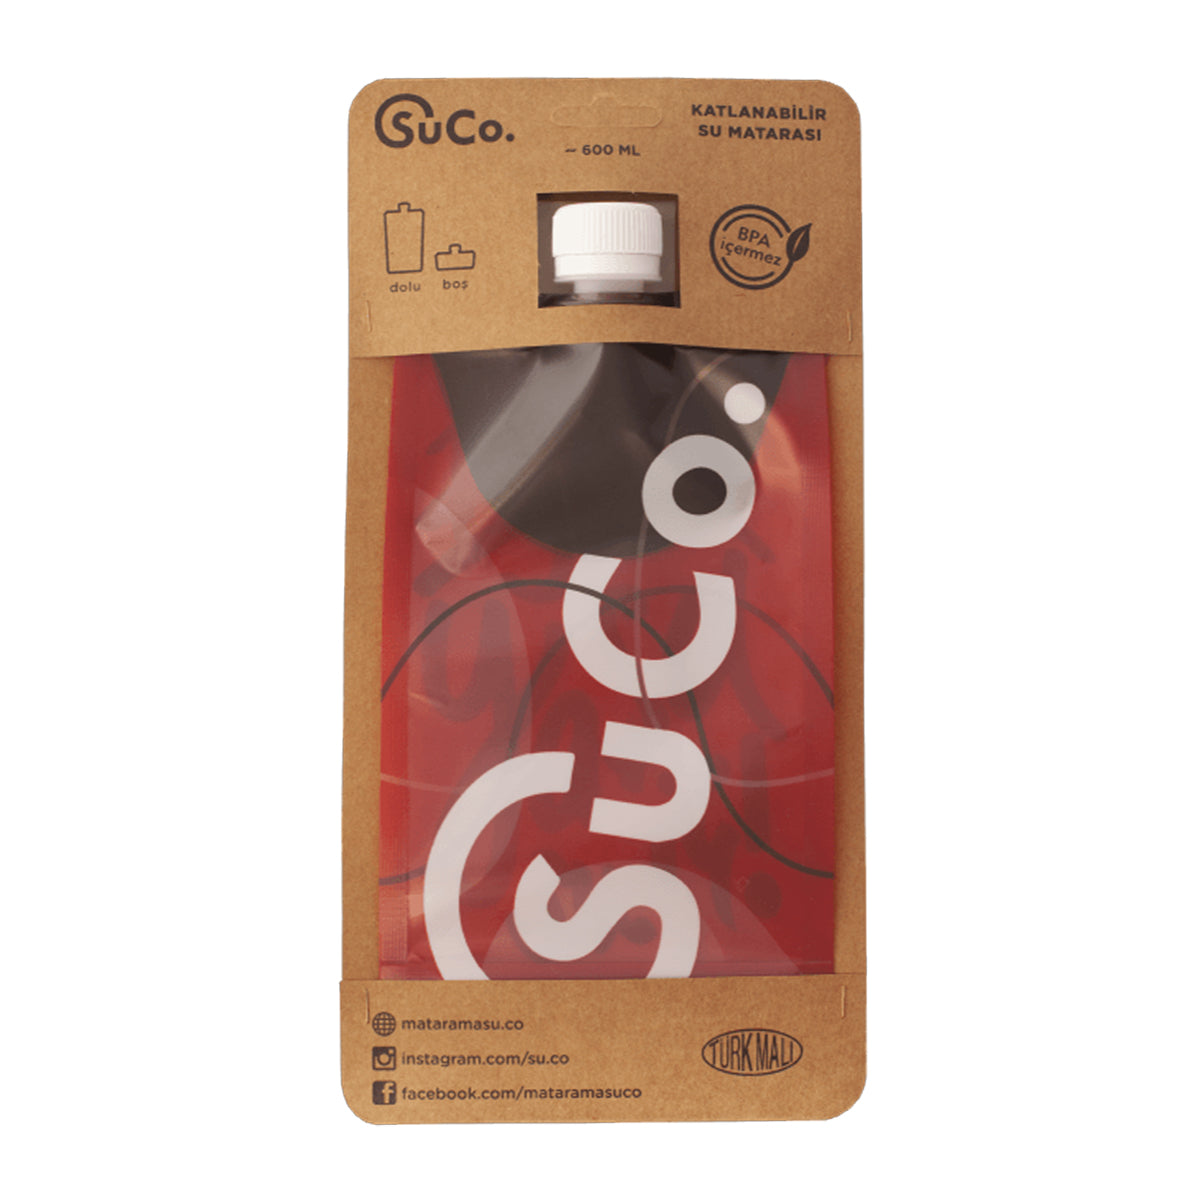 Fire SuCo - 600 ml